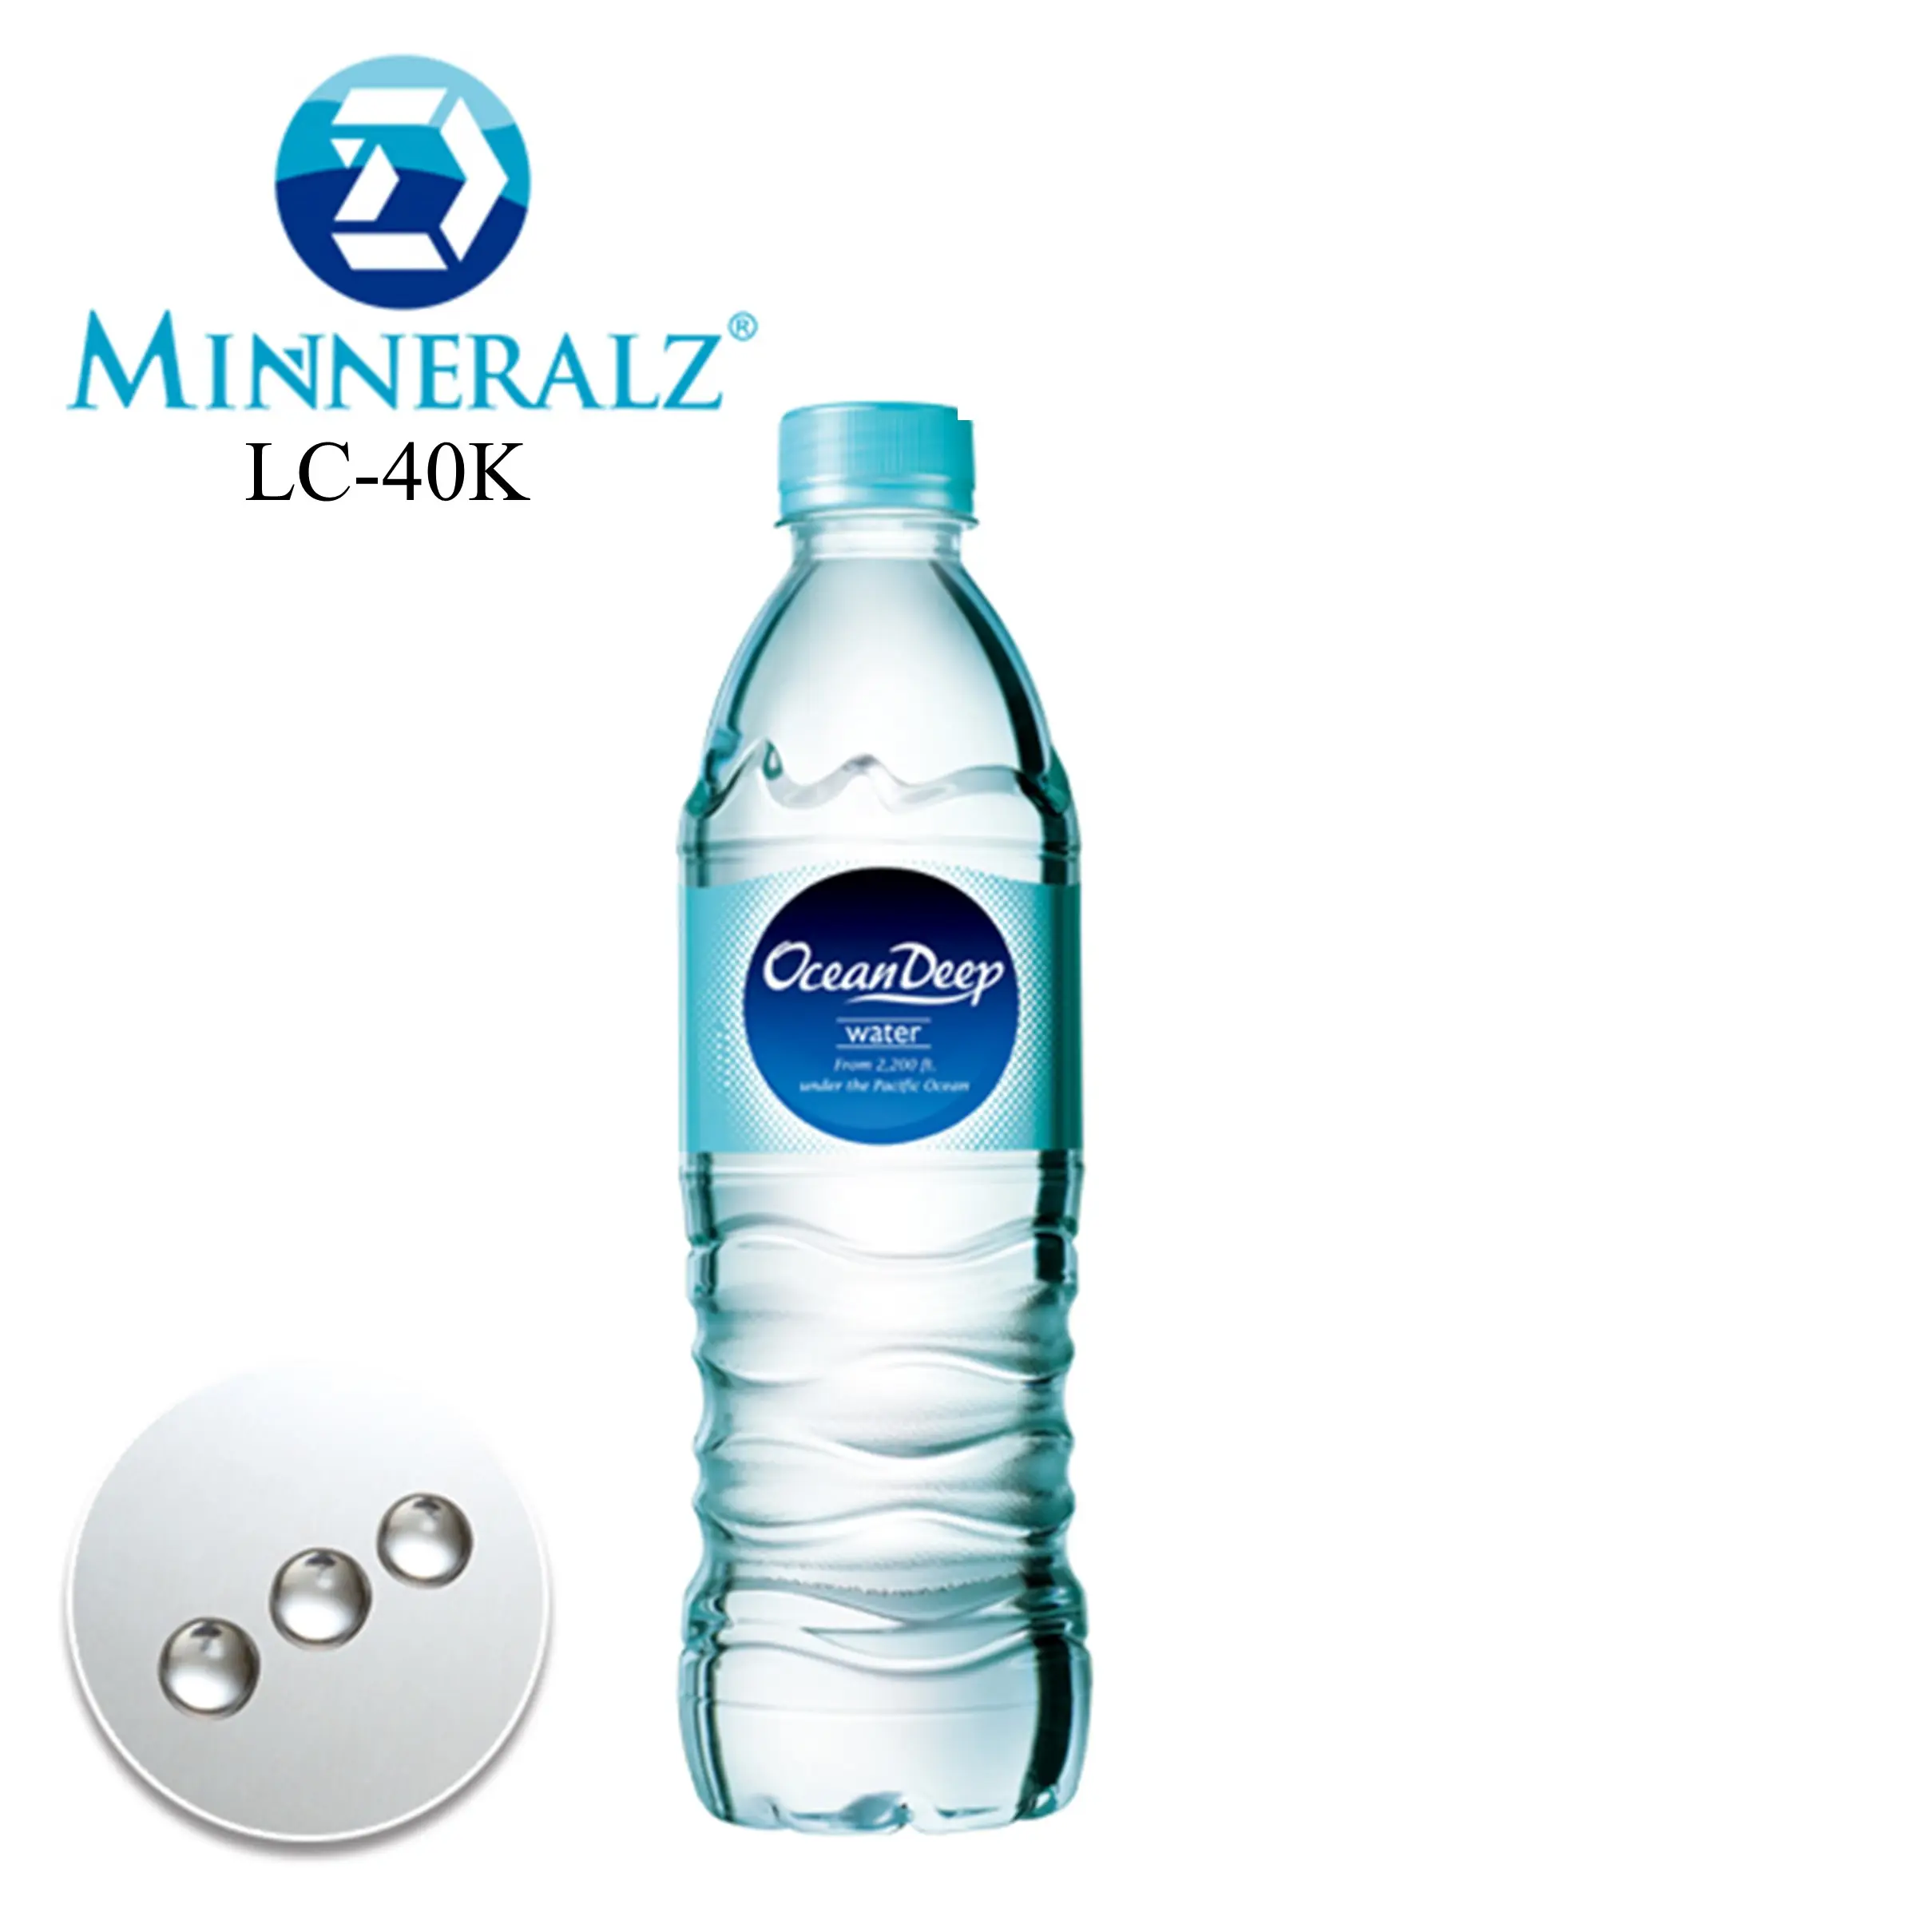 [D-minneralz] Taiwan Natural Deep Sea Minerals Concentrate Soluble in Water